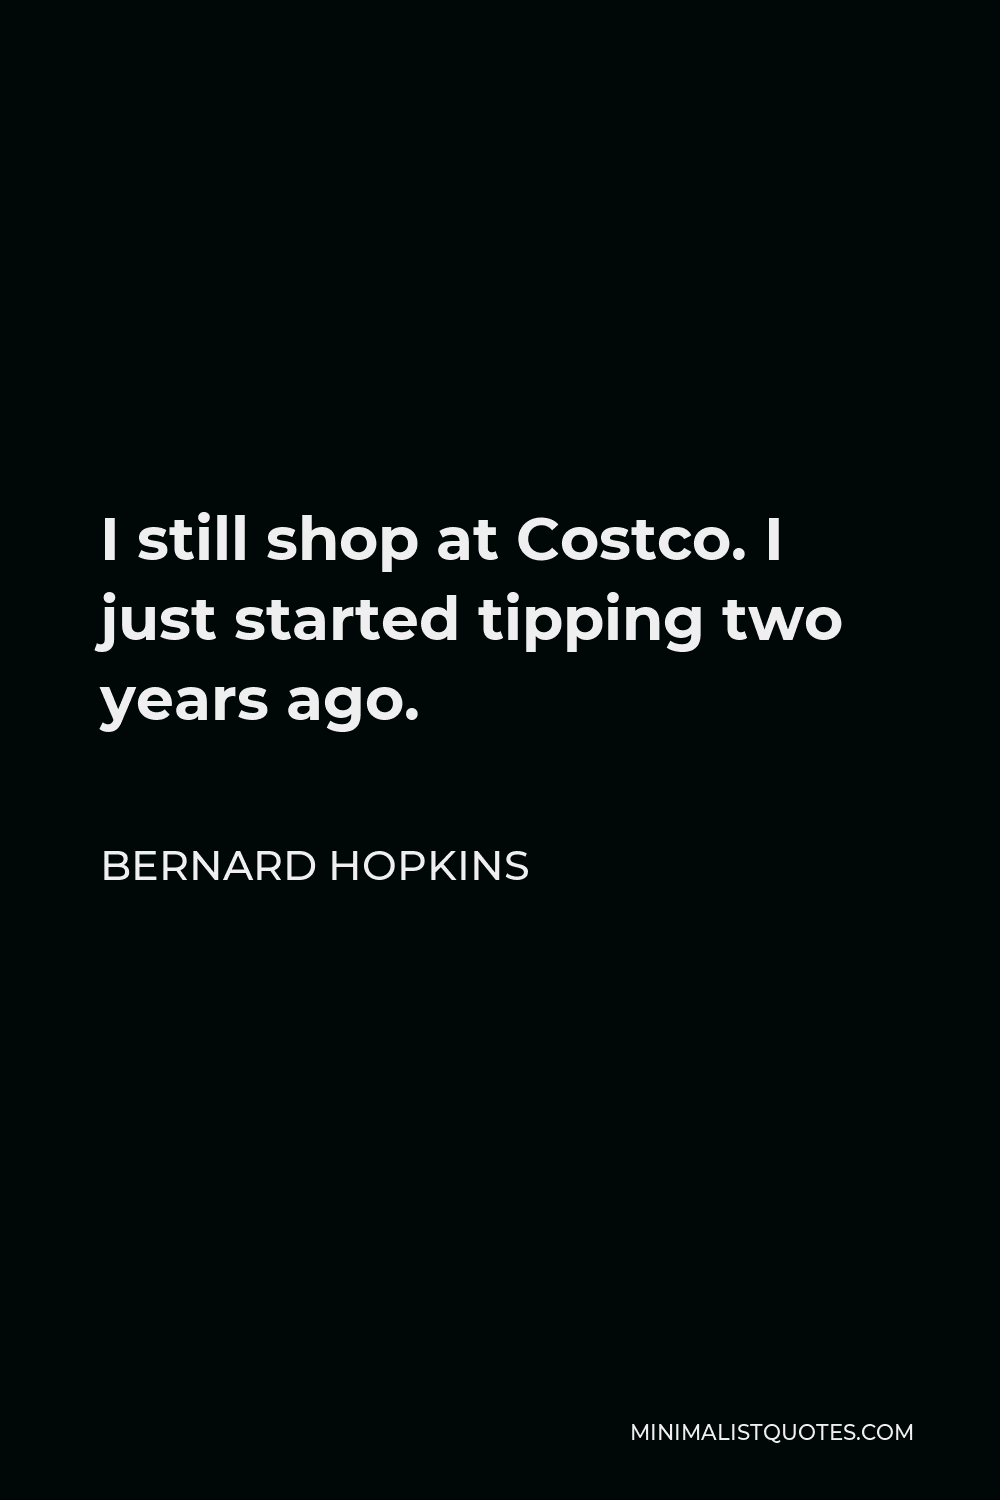 Bernard Hopkins Quote - I still shop at Costco. I just started tipping two years ago.